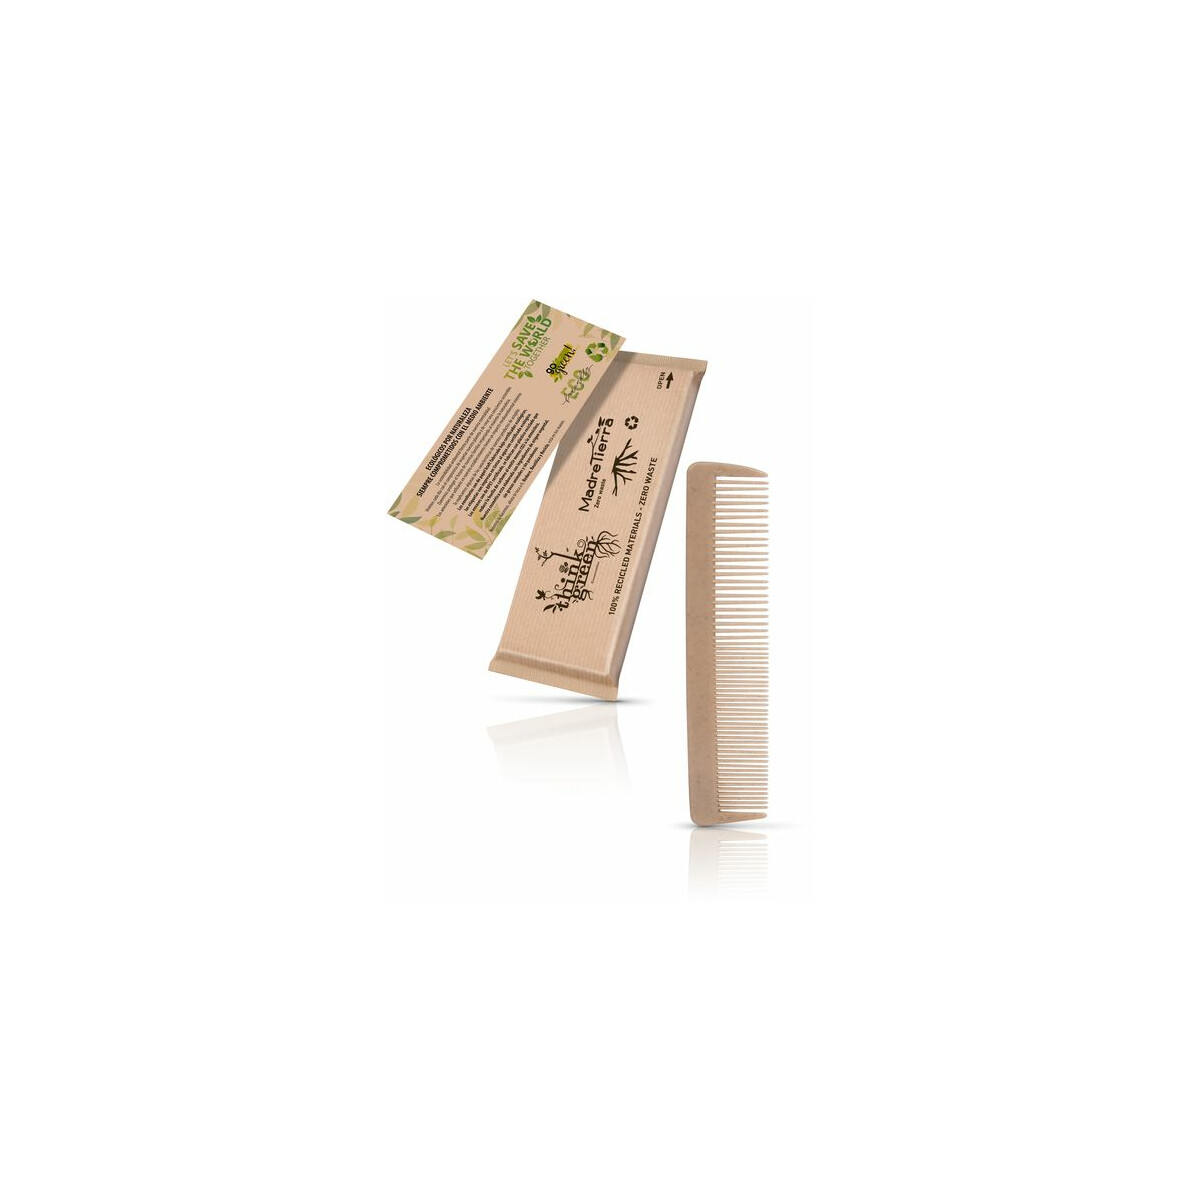 Organic comb - individually packaged | Customized